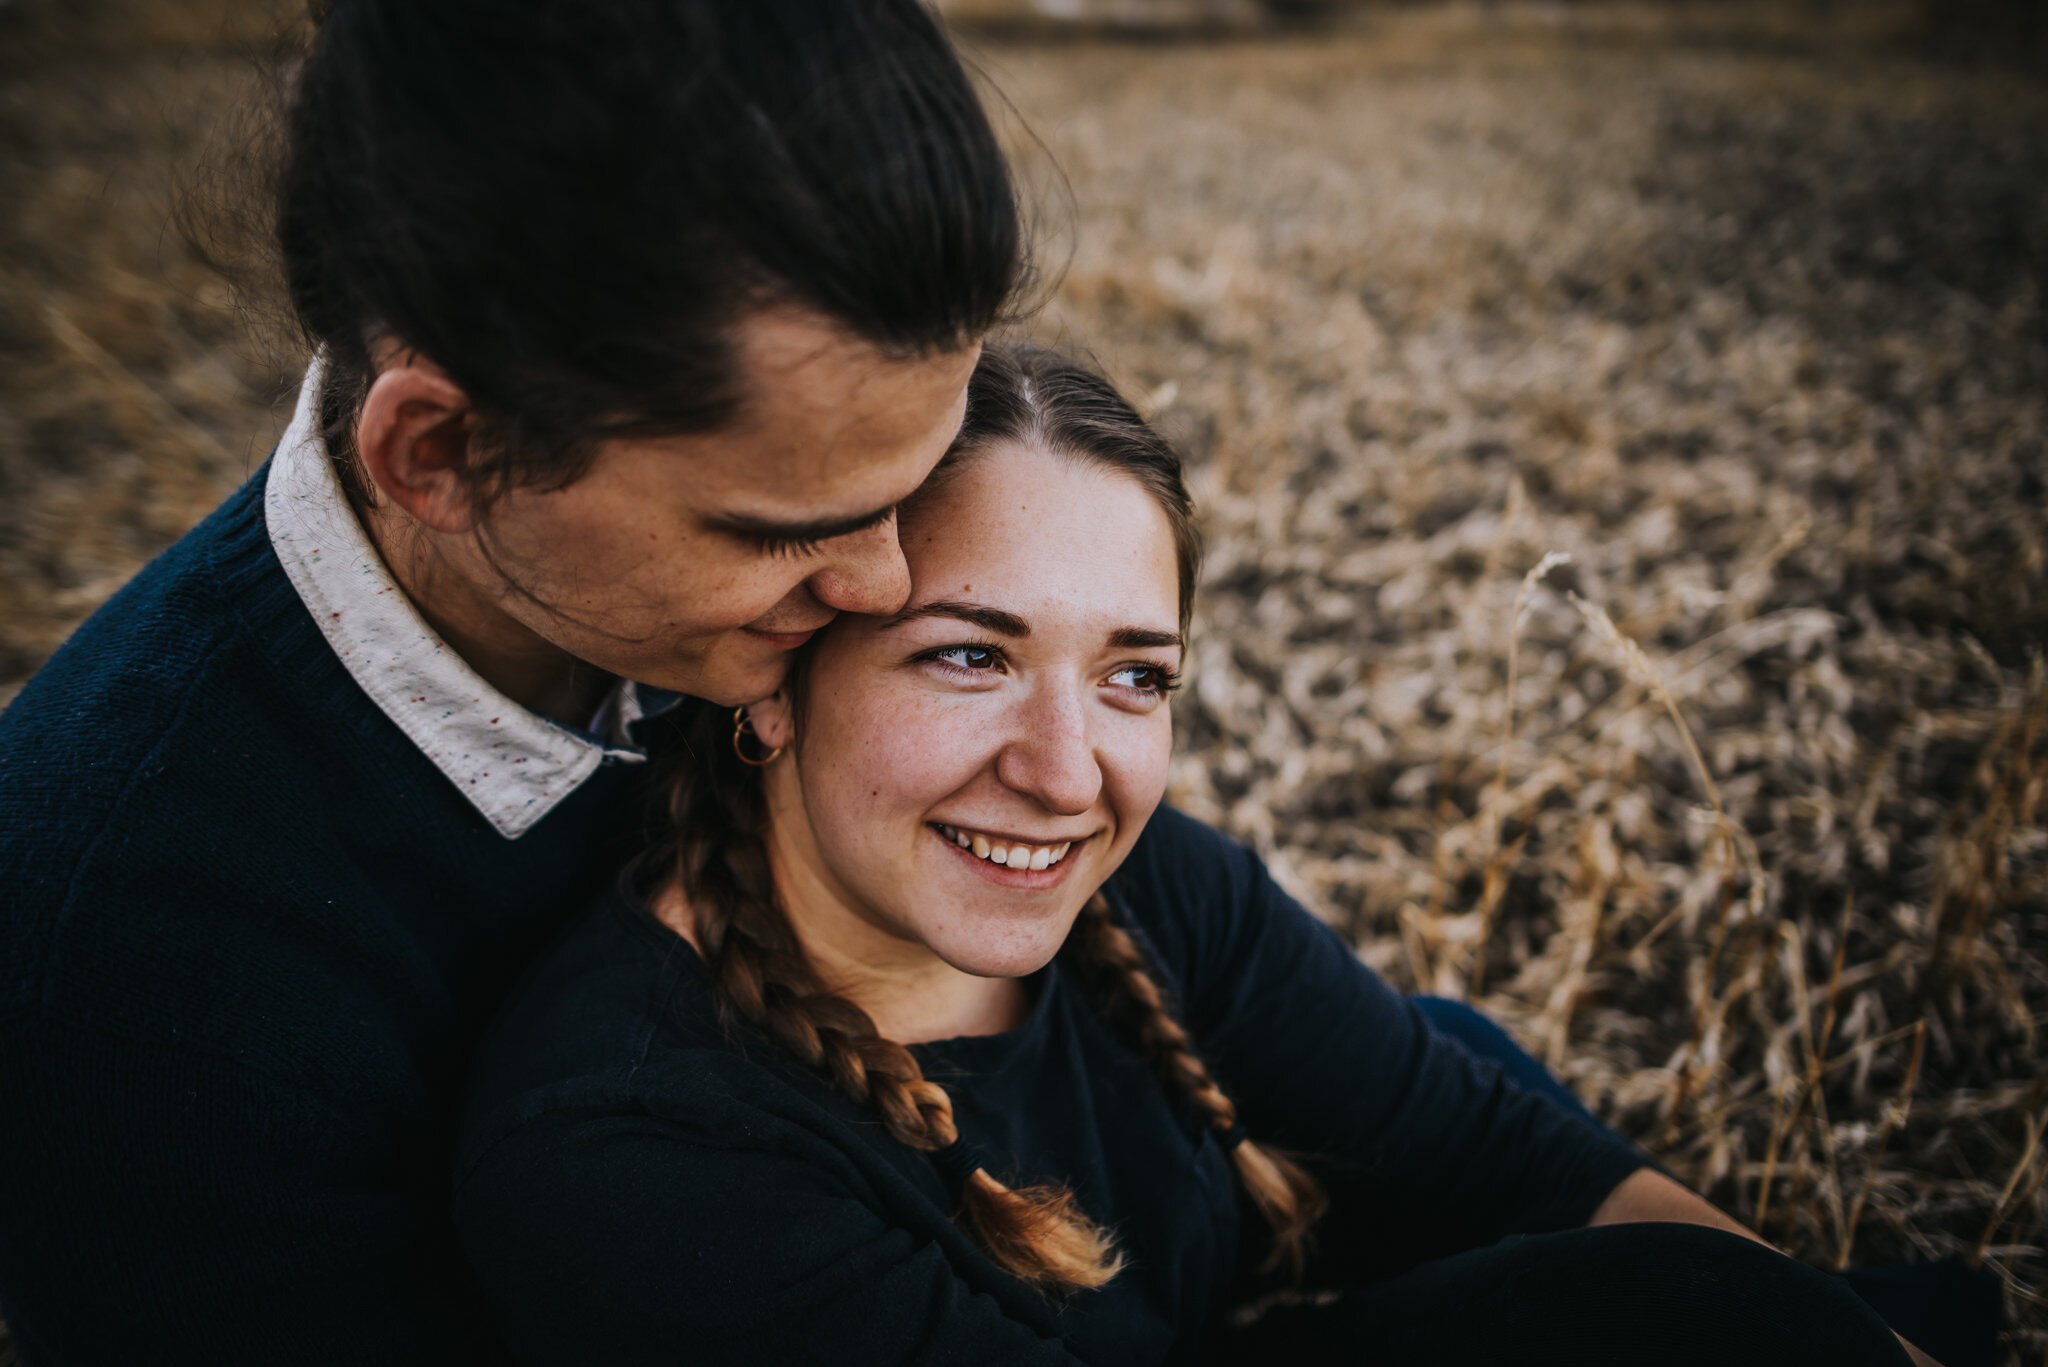 Yulia+and+Logan+Couples+Session+Colorado+Springs+Colorado+Sunset+Cheyenne+Canyon+Husband+Wife+Wild+Prairie+Photography-18-2020.jpeg